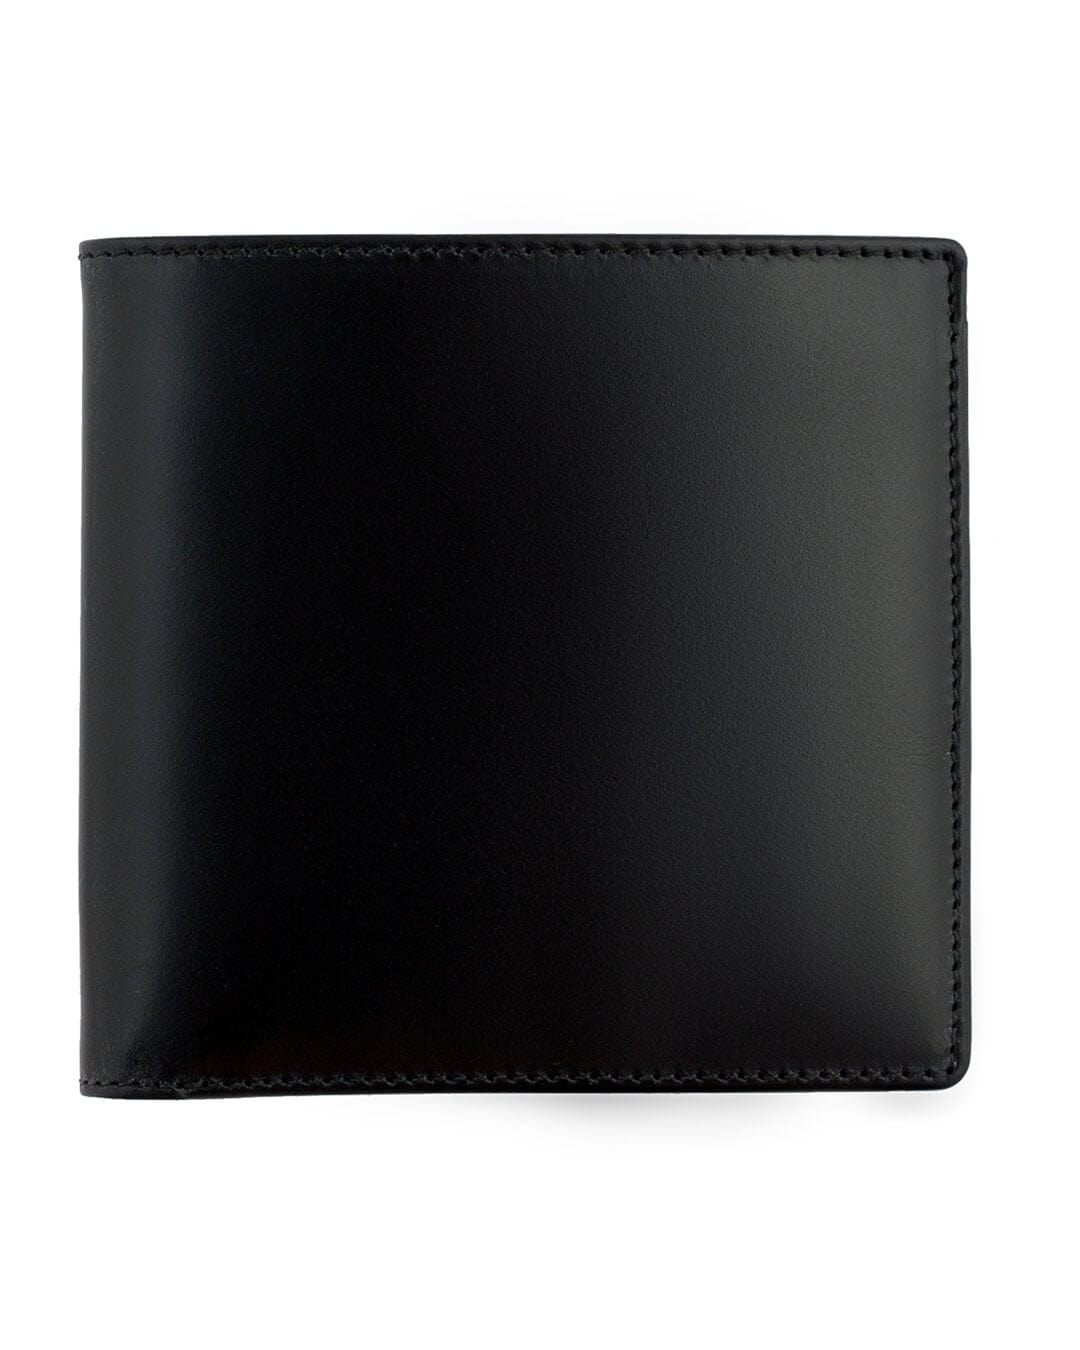 Cavesson's Wallets Cavesson's Black And Aqua Note Wallet